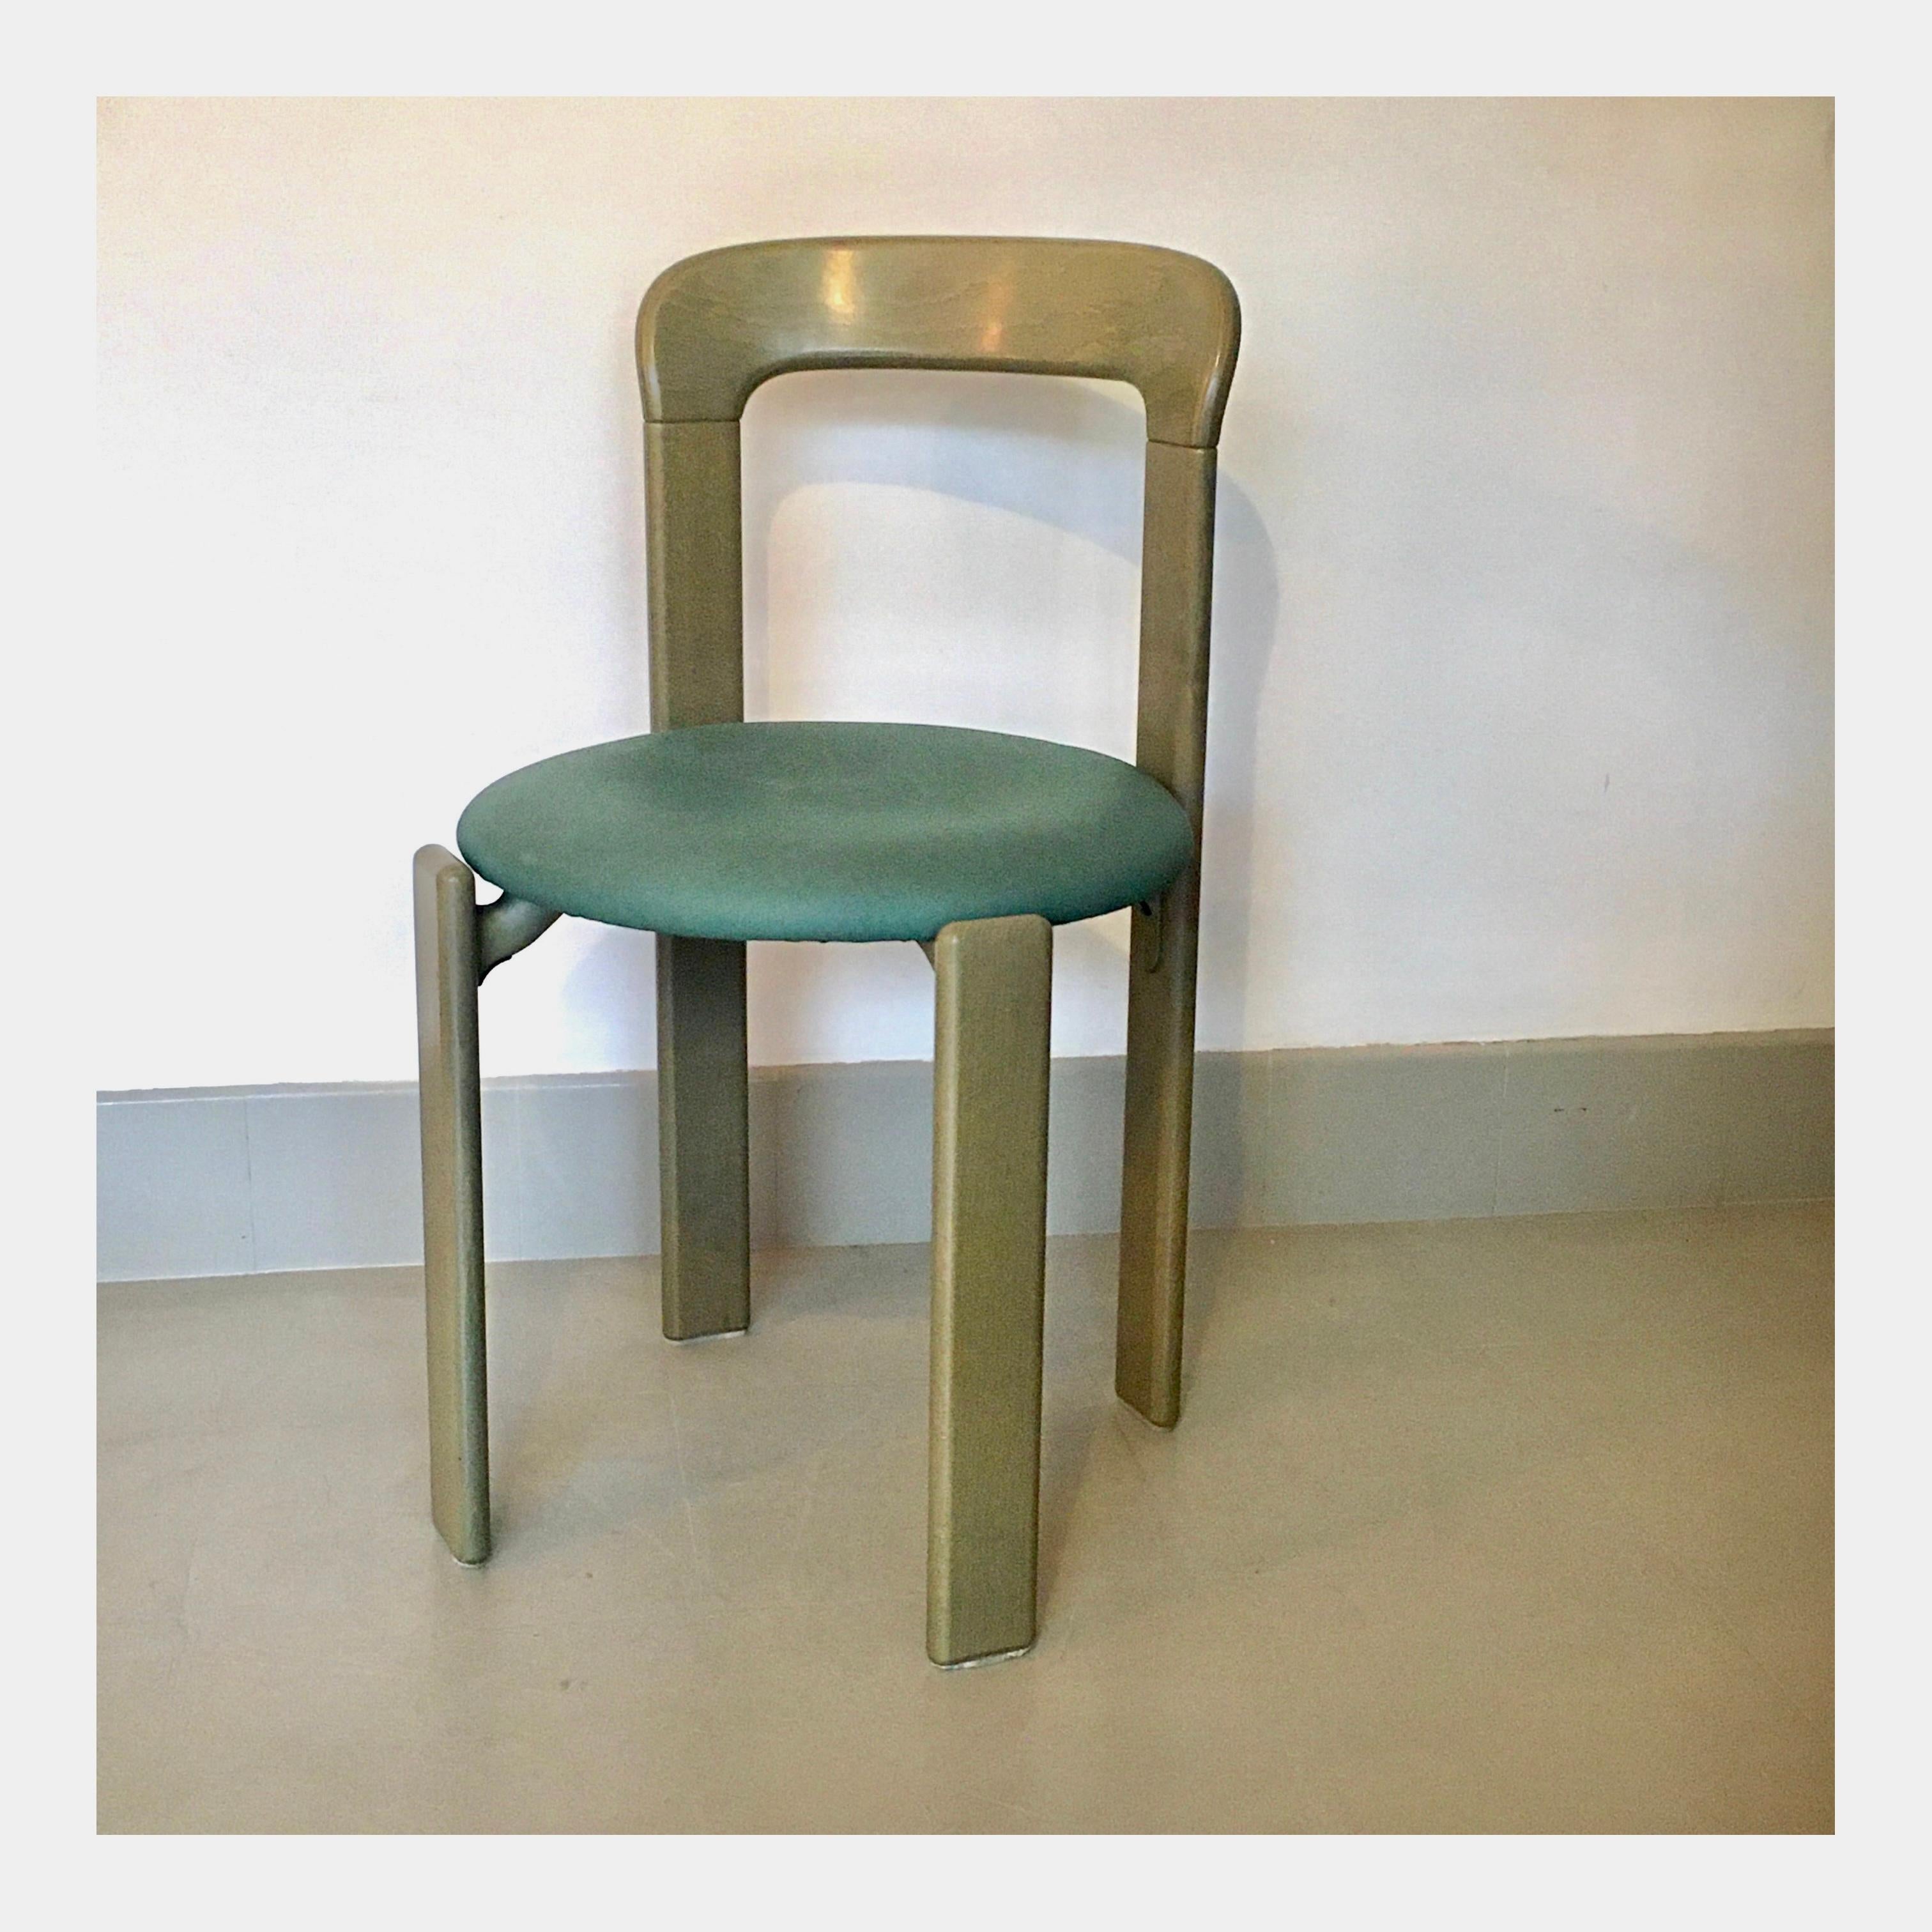 Designed by Bruno Rey for Dietiker in the 70s, Switzerland. Several pieces available. The version offered here is in stained wood in a deep olive green. Seats are covered with a green lavable skai fabric. The chairs are solid, robust and above all